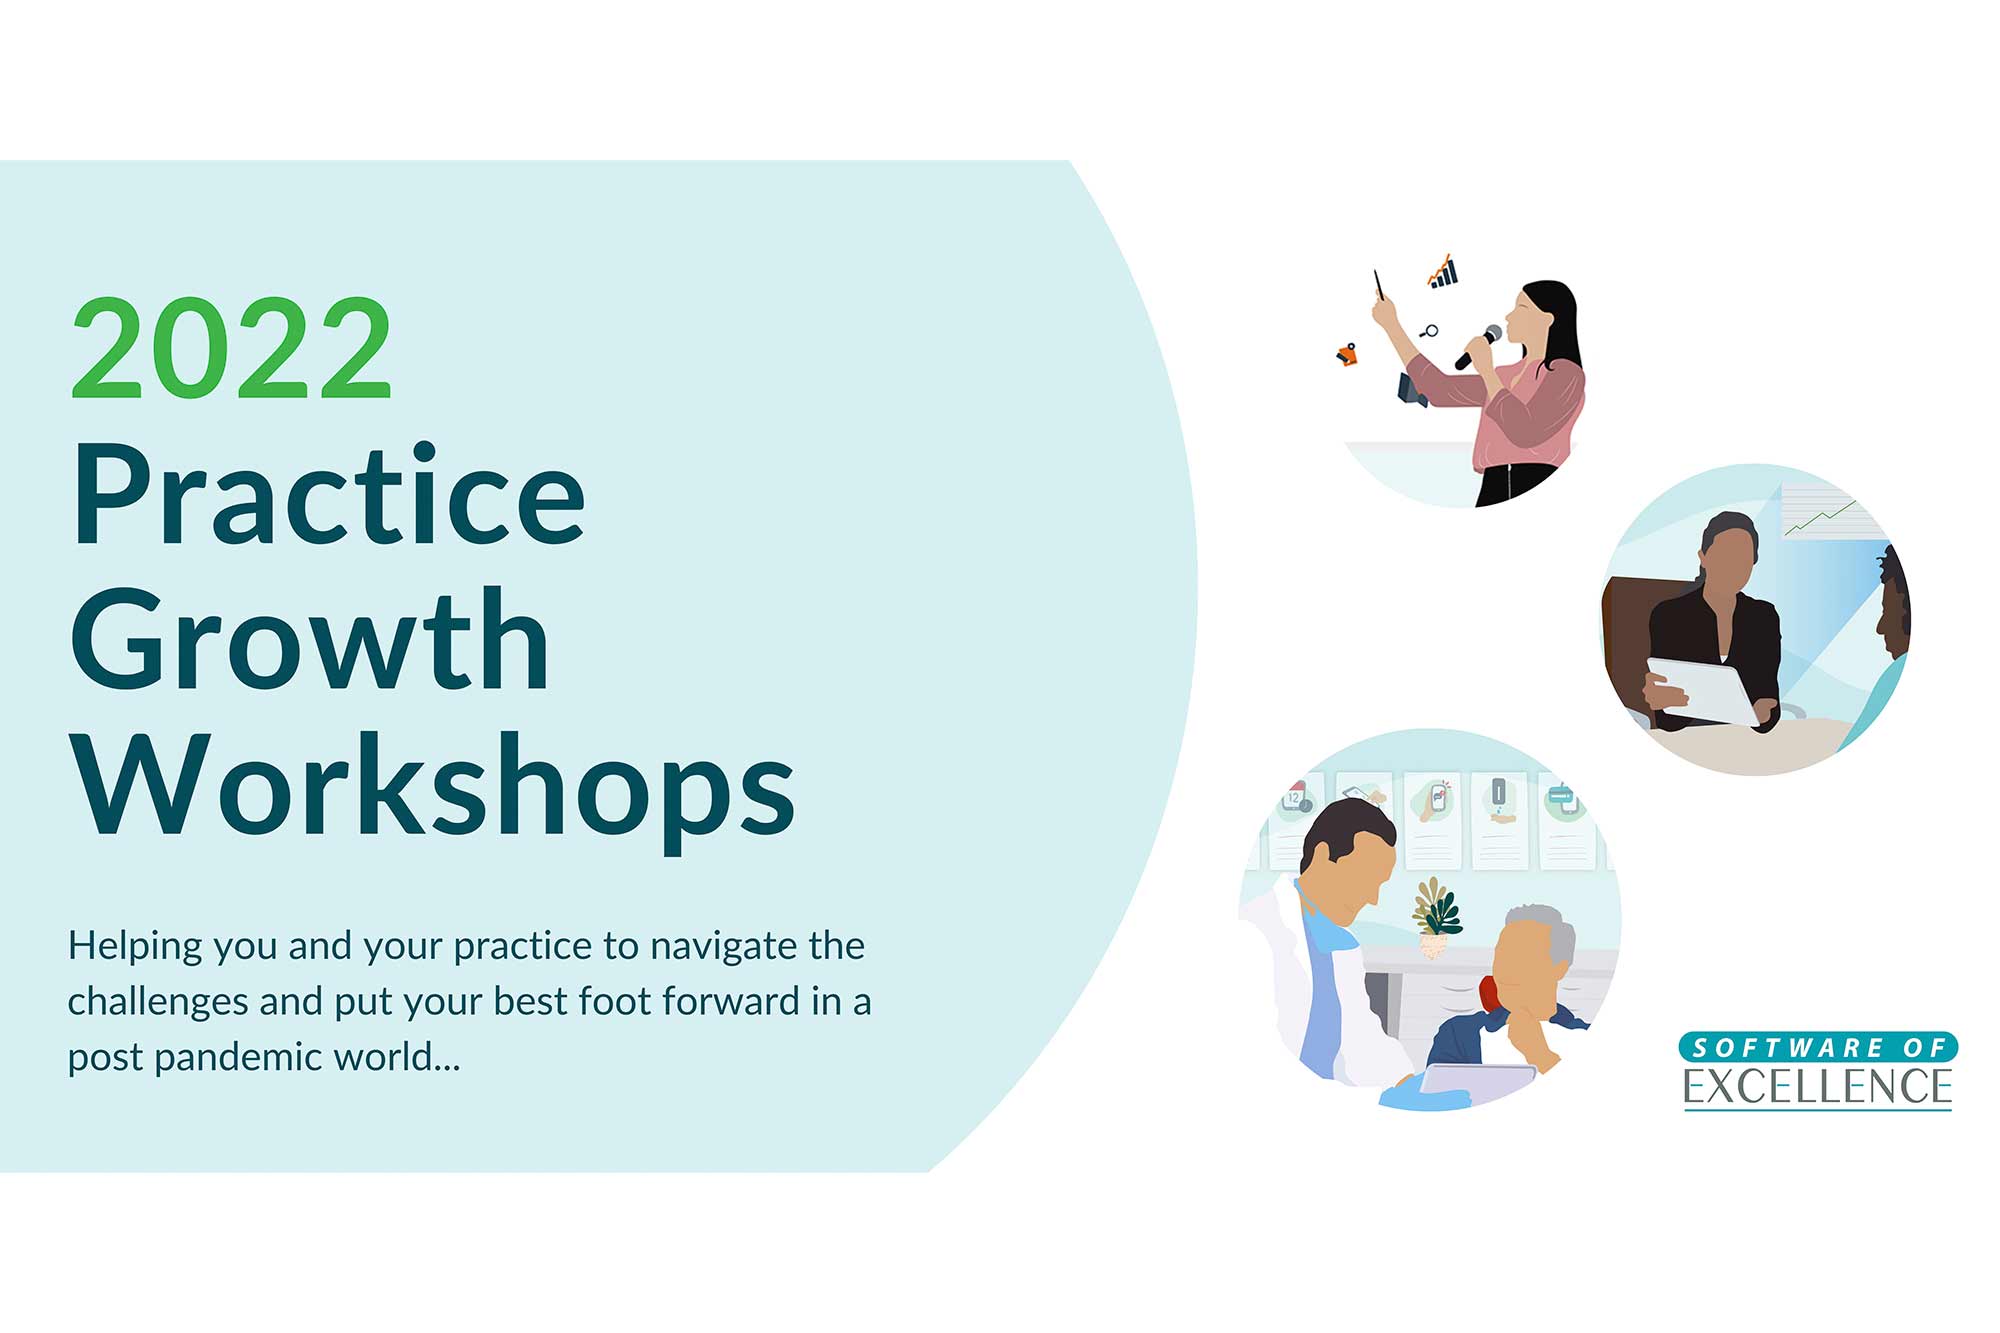 Announcing: Software of Excellence’s 2022 Practice Growth Workshops